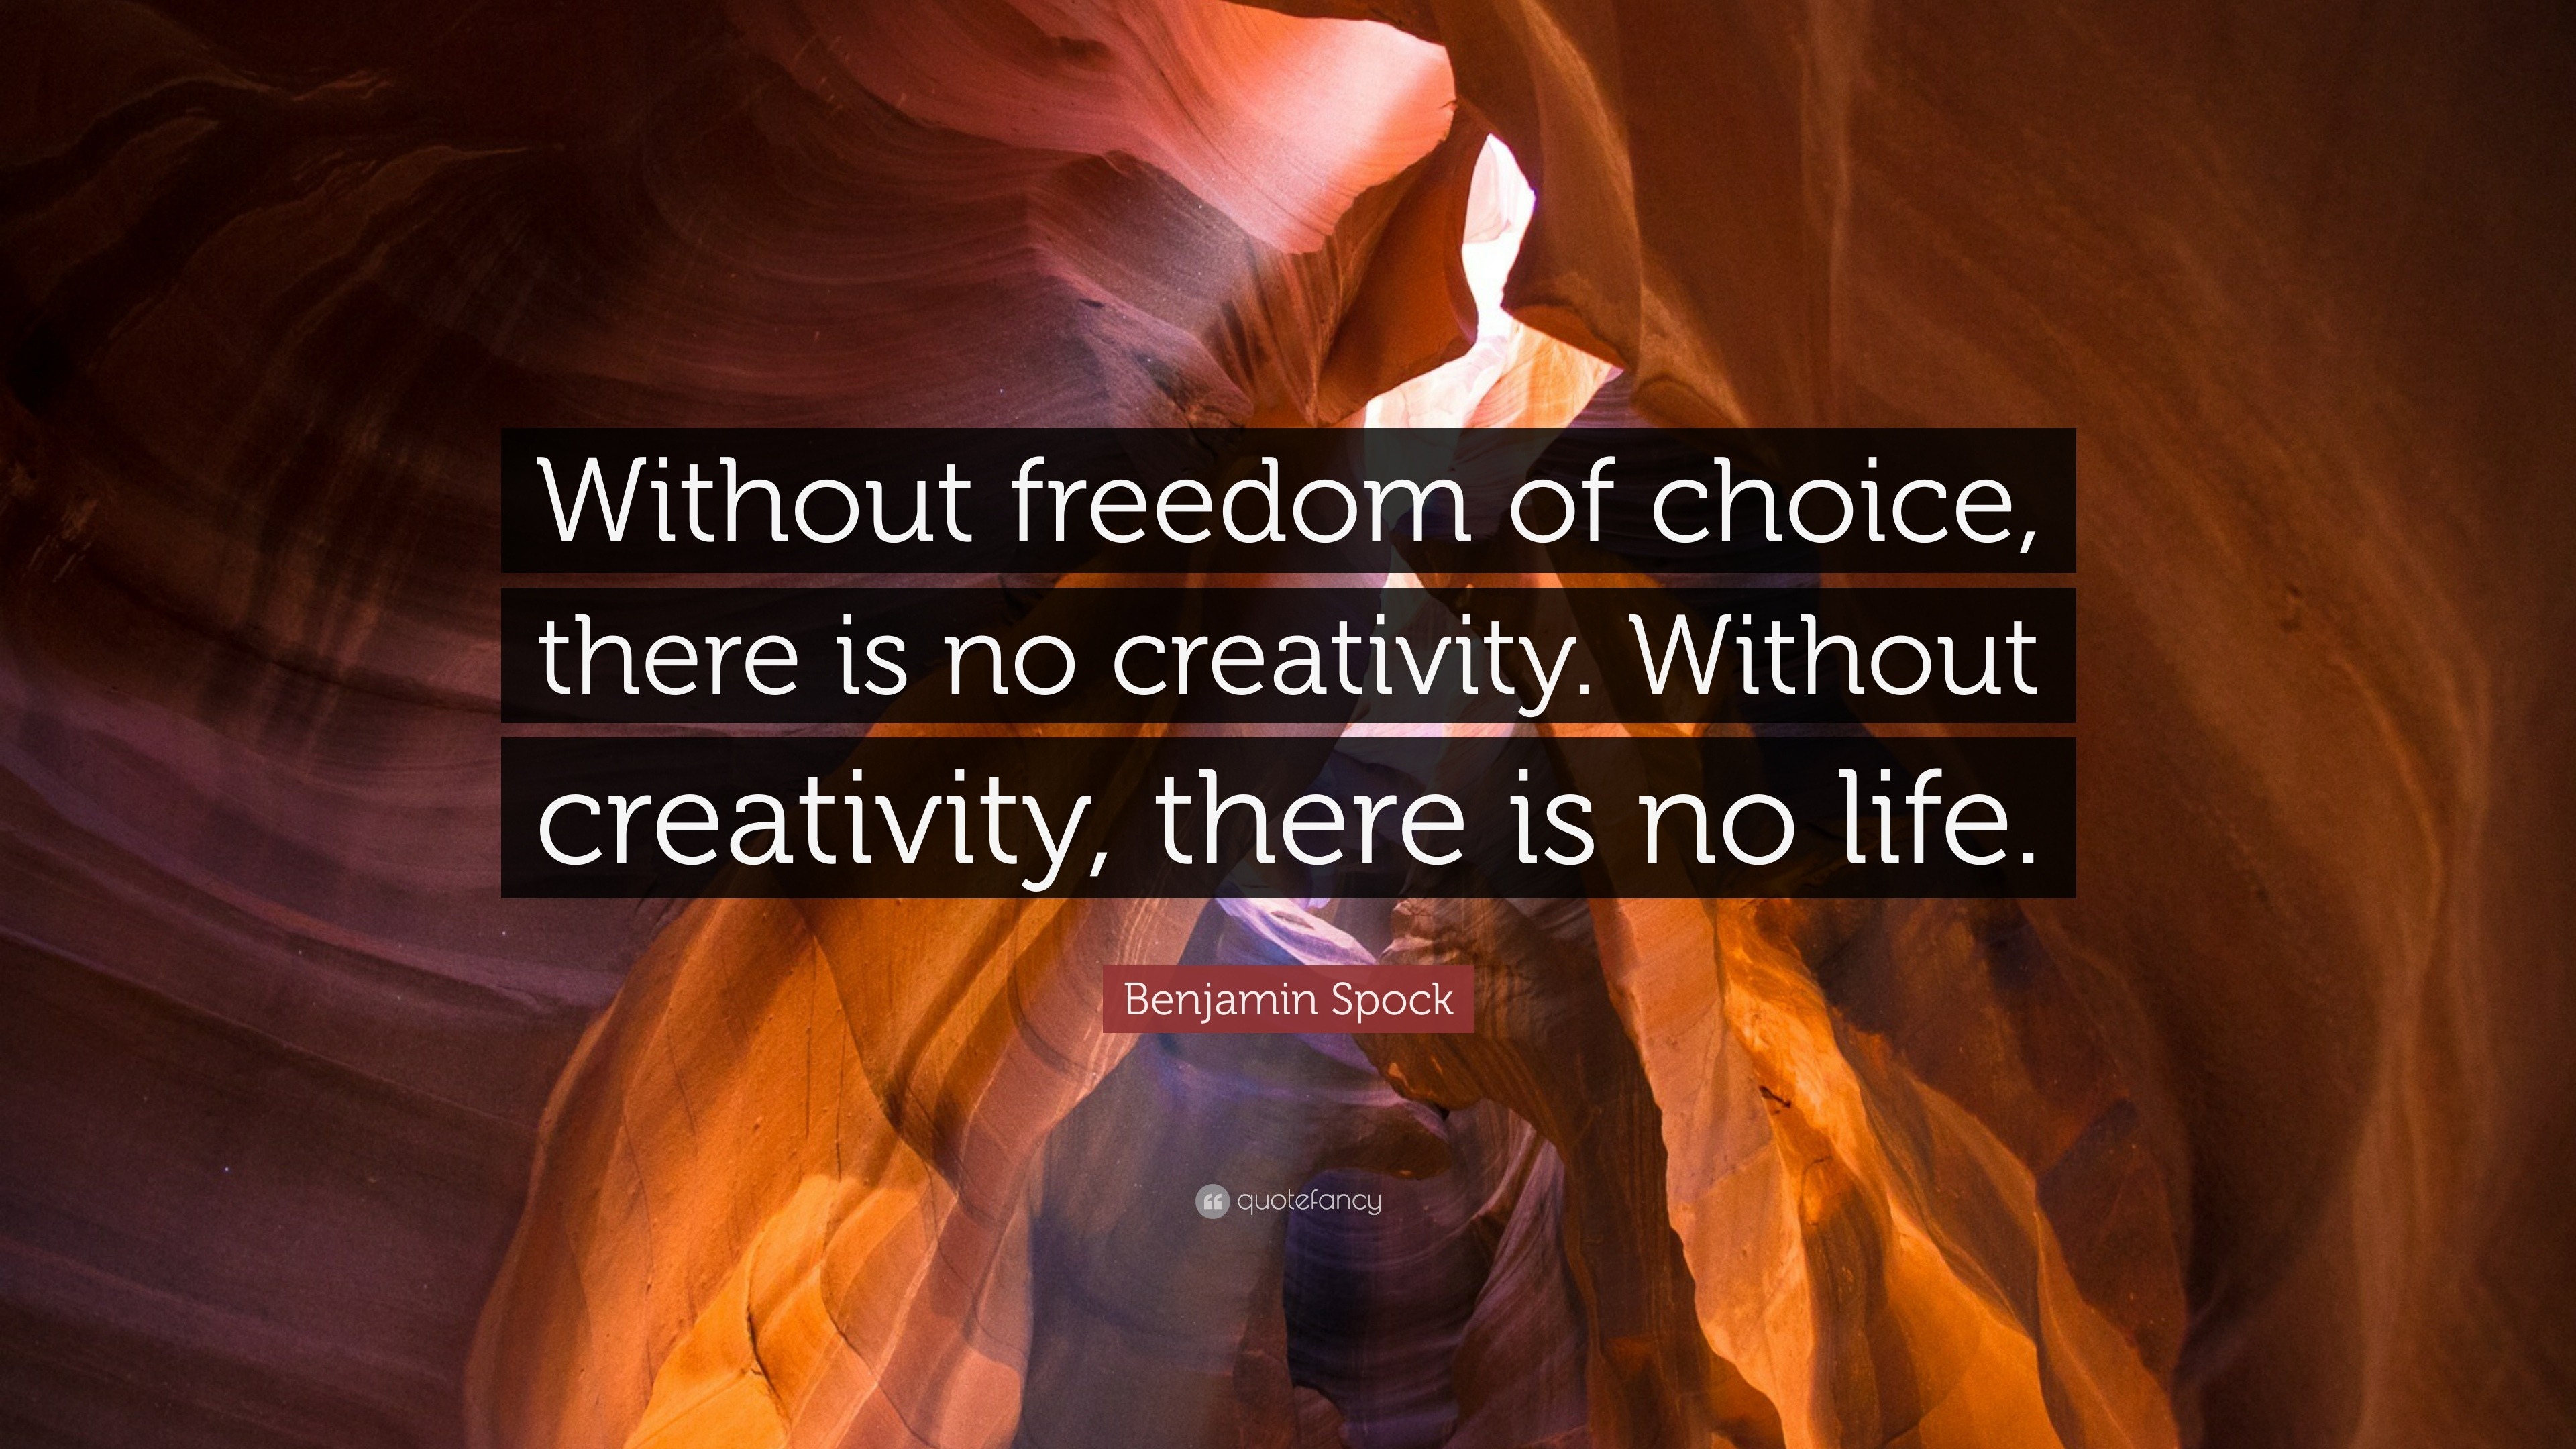 Benjamin Spock Quote “Without freedom of choice there is no creativity Without